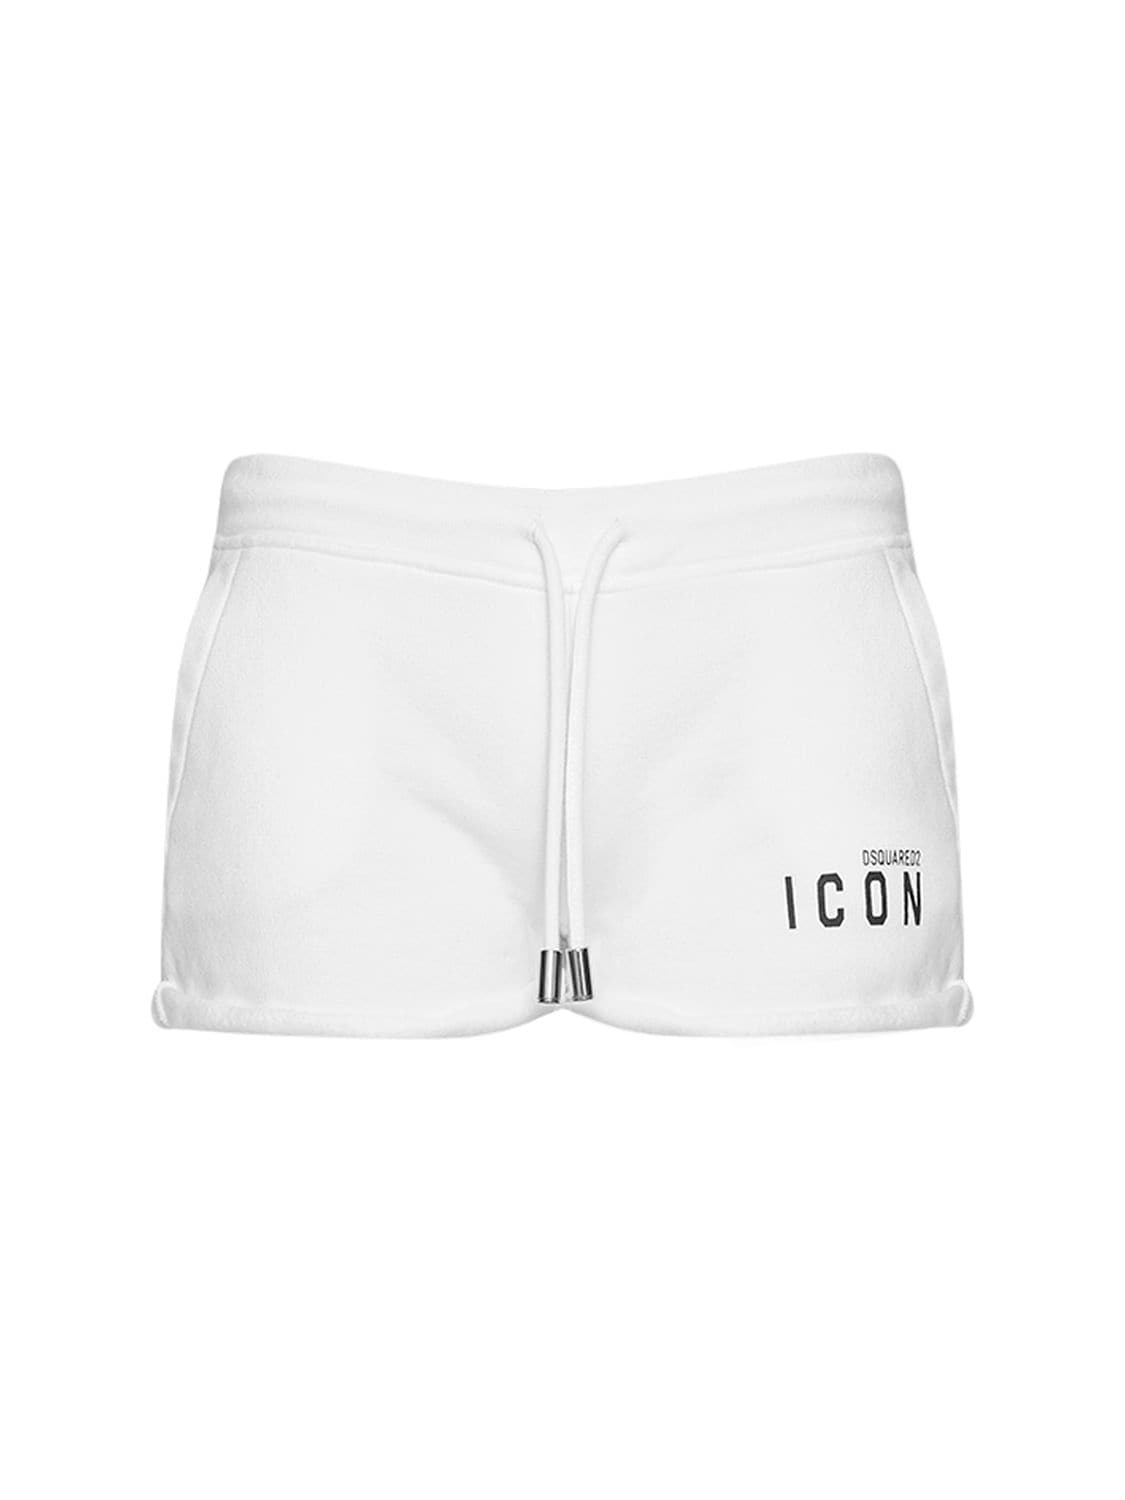 DSQUARED2 ICON COTTON JERSEY MINI SHORTS,73I07Y107-MTAW0